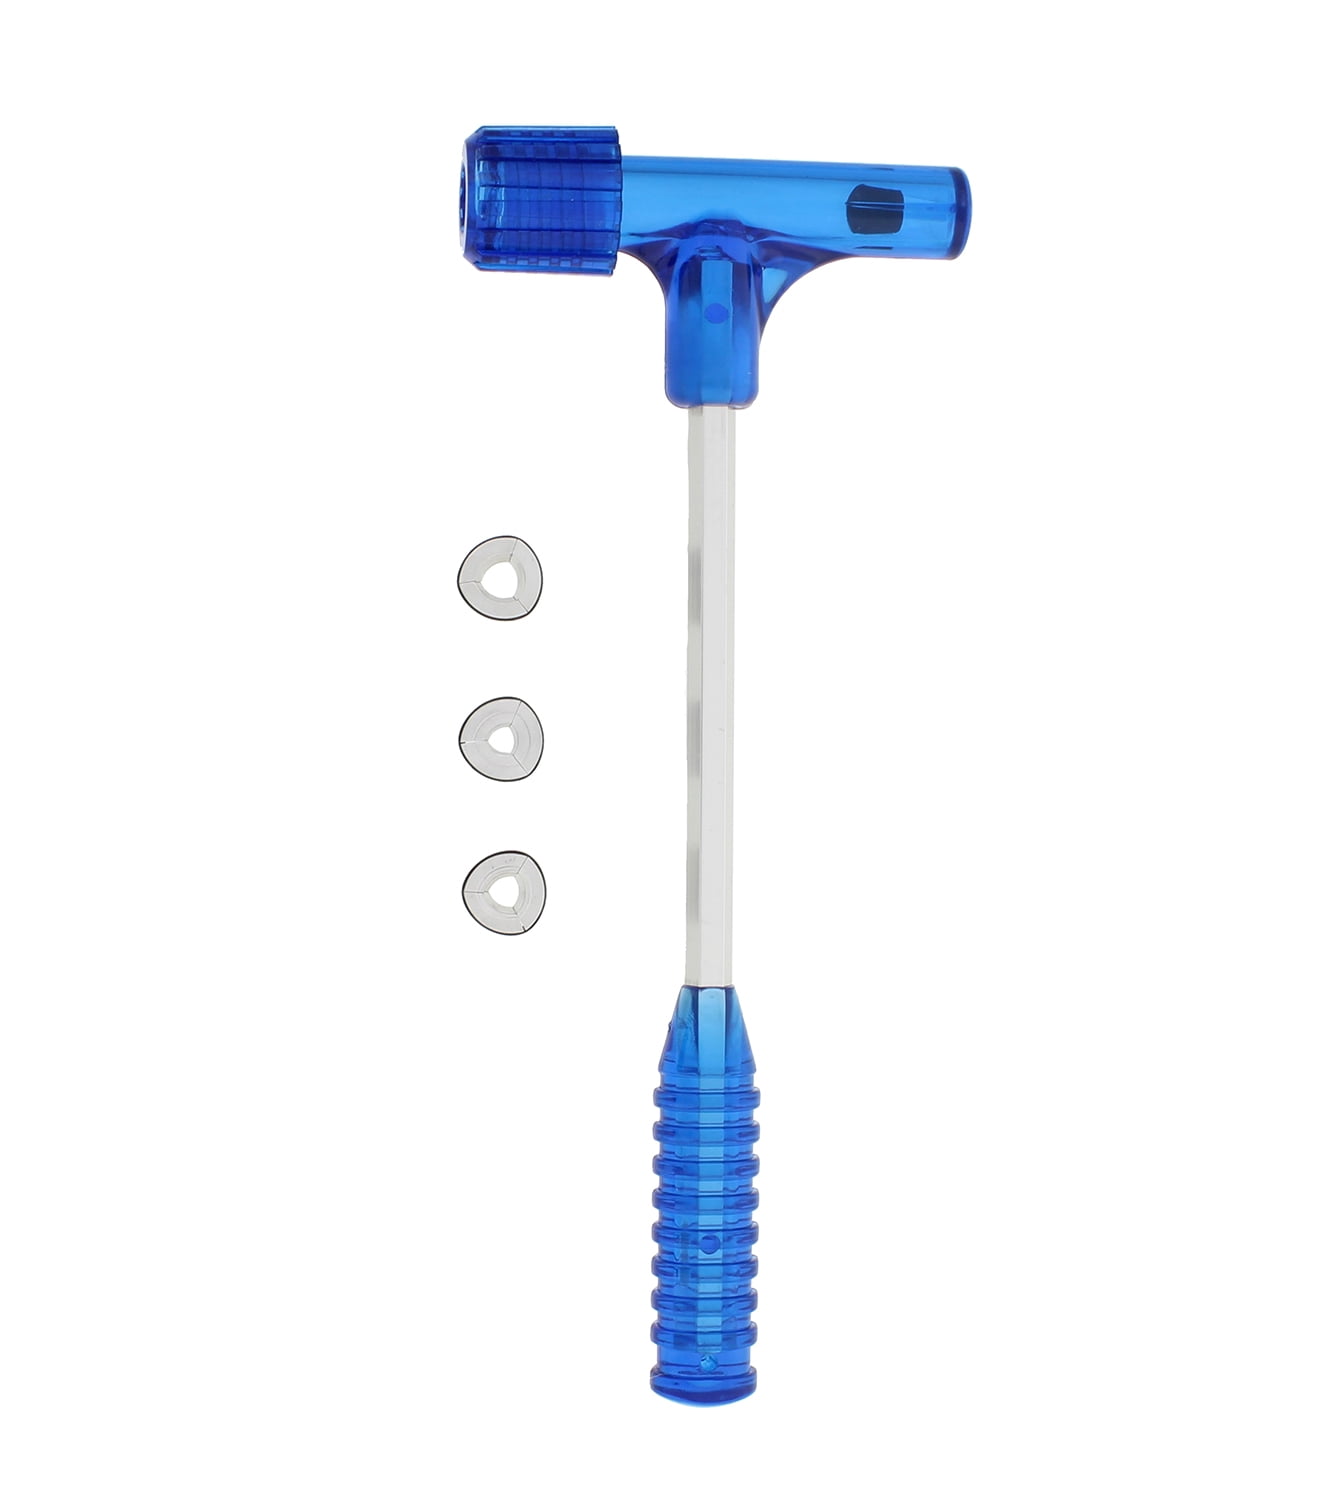 New Blue Color Impact Bullet Puller Hammer Tool w/ 3 Expandable Collets 